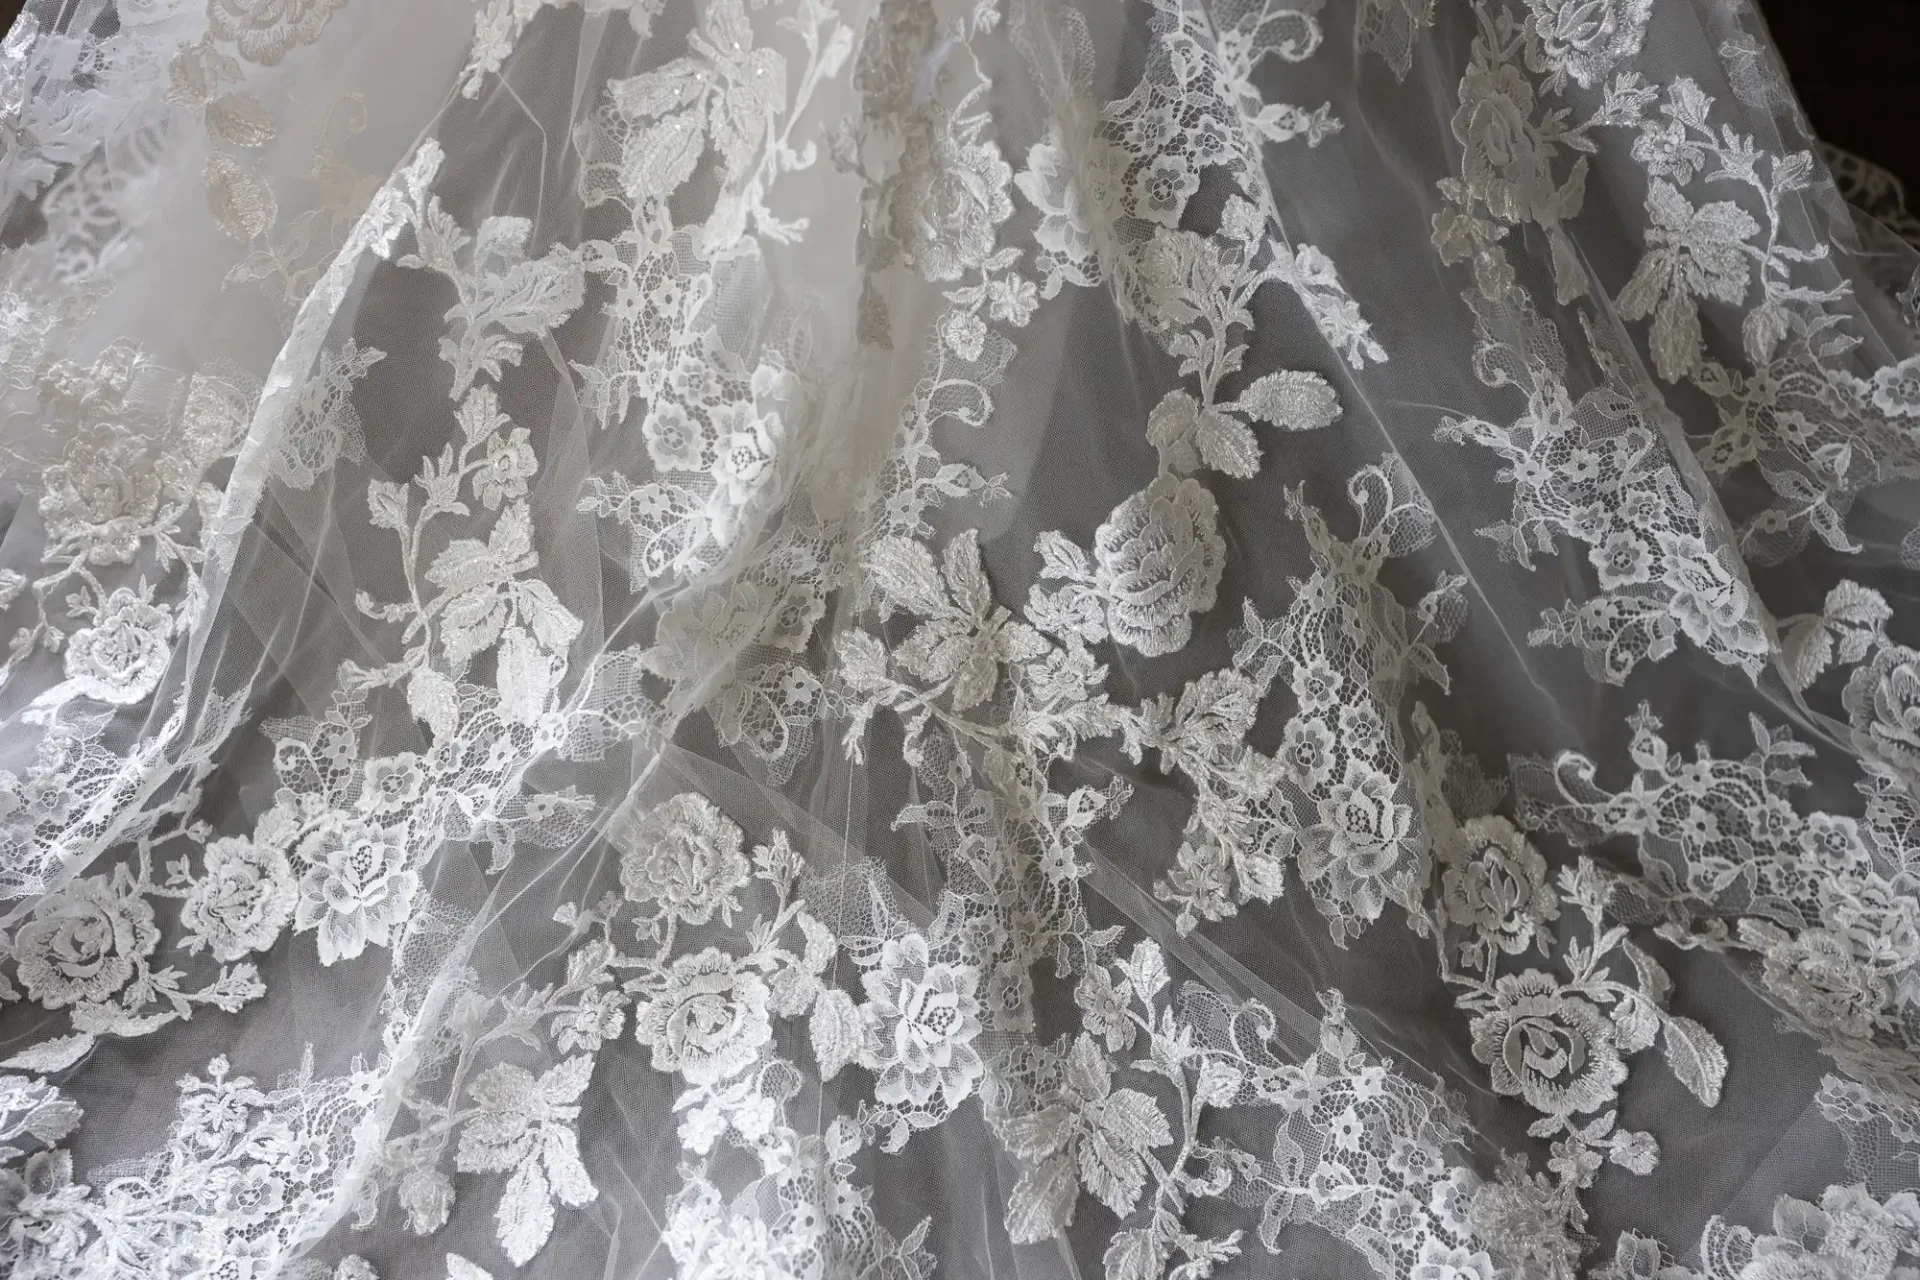 Close-up of delicate white lace fabric with intricate floral embroidery.